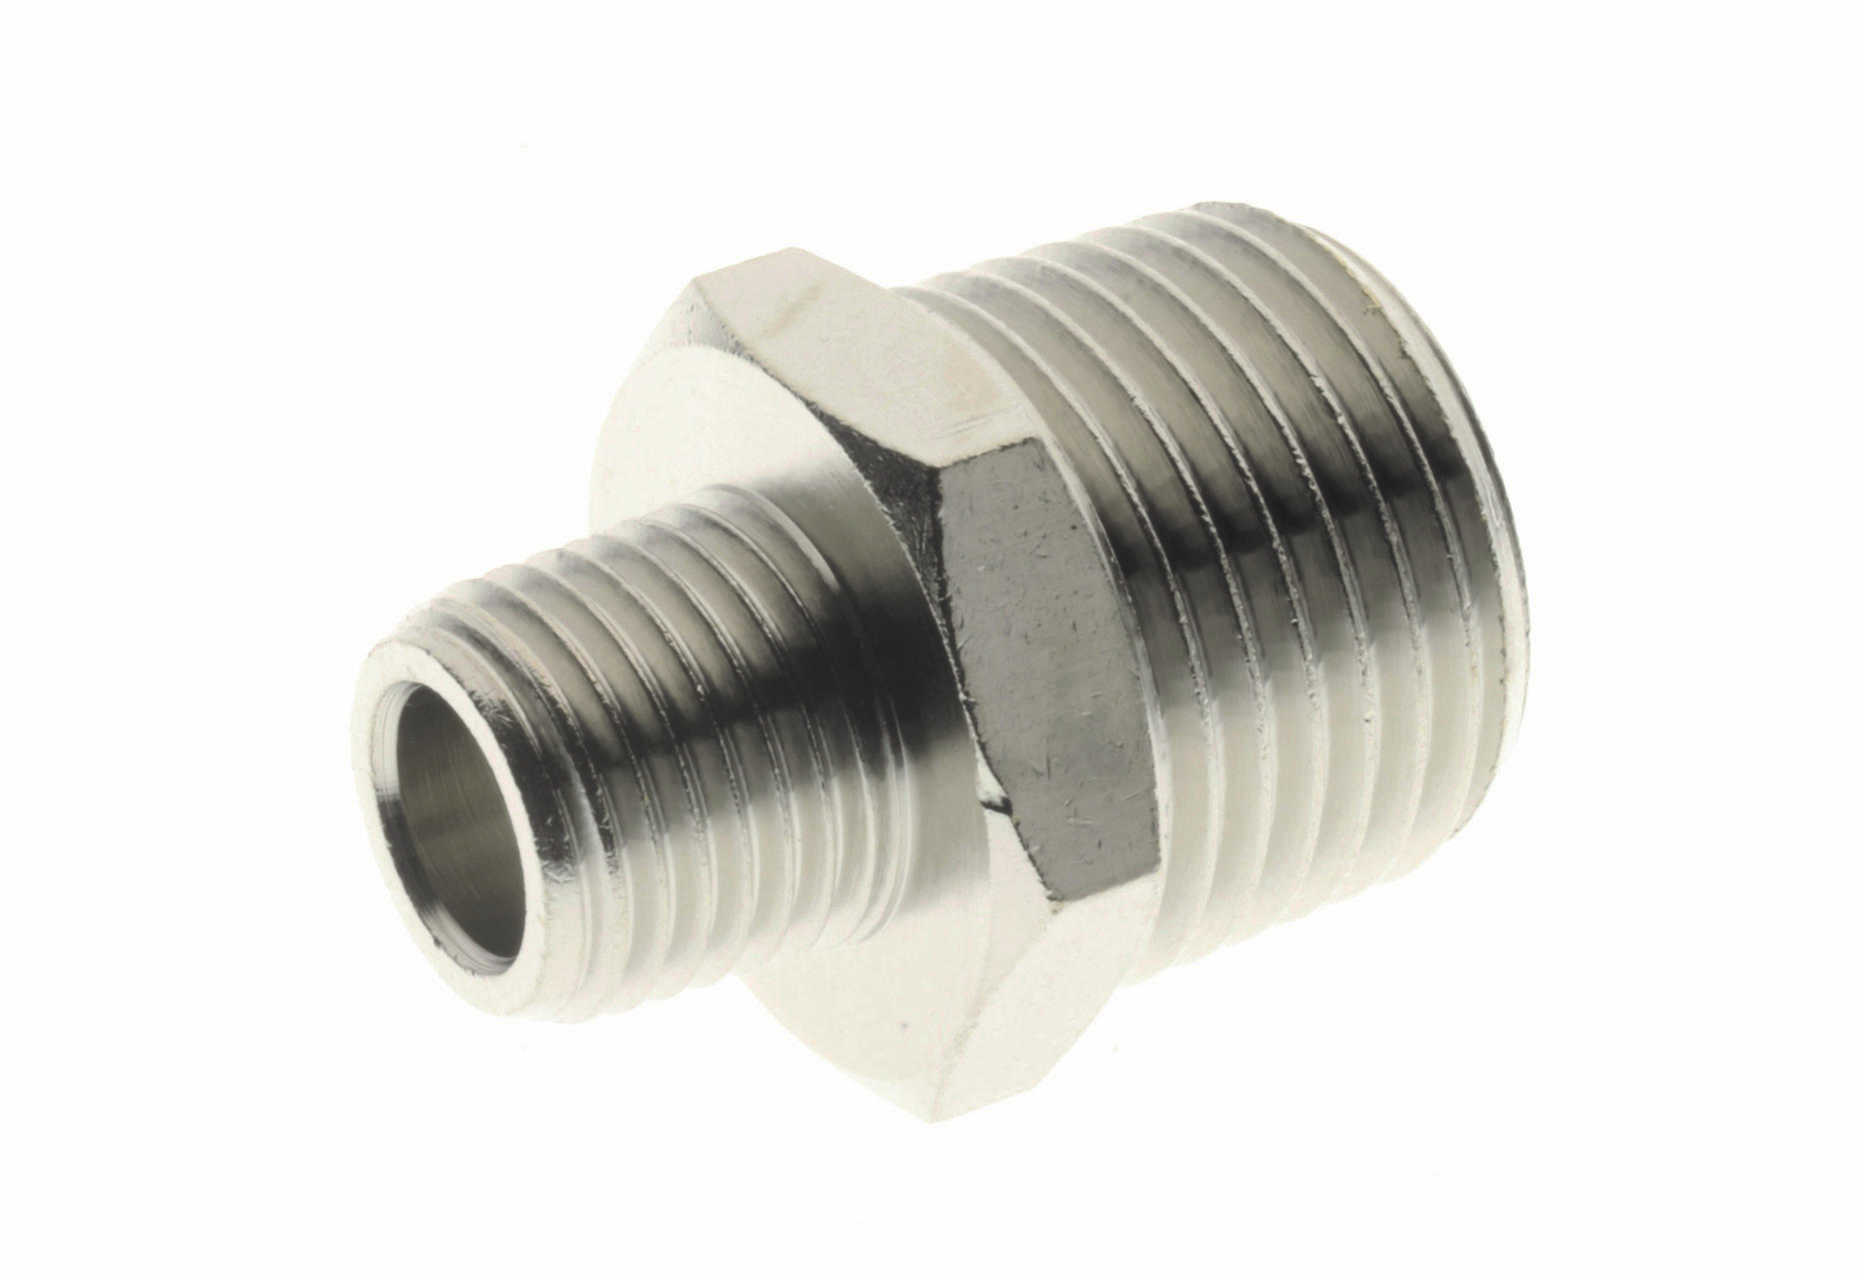 Male reduction 1/2 male 1\" conical Standard fittings